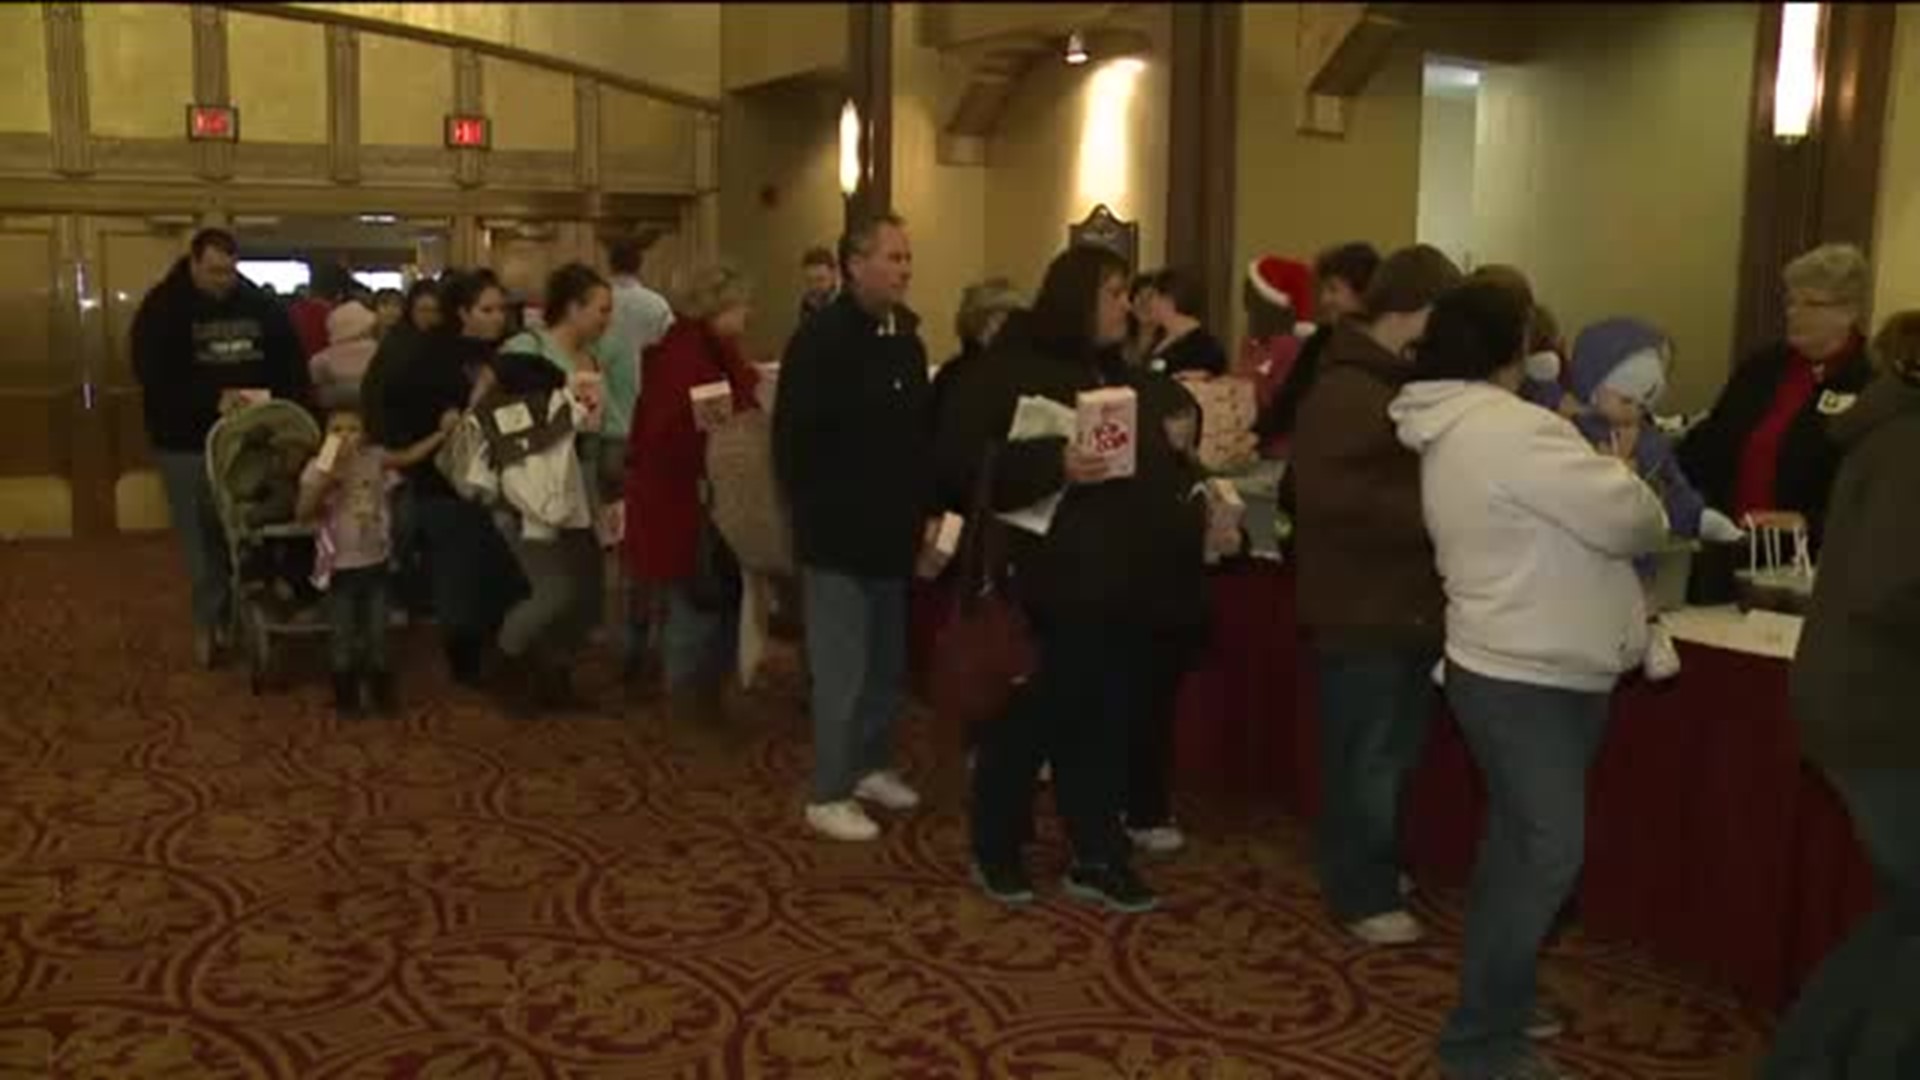 Holiday Tradition: Free Movie Event in Wilkes-Barre